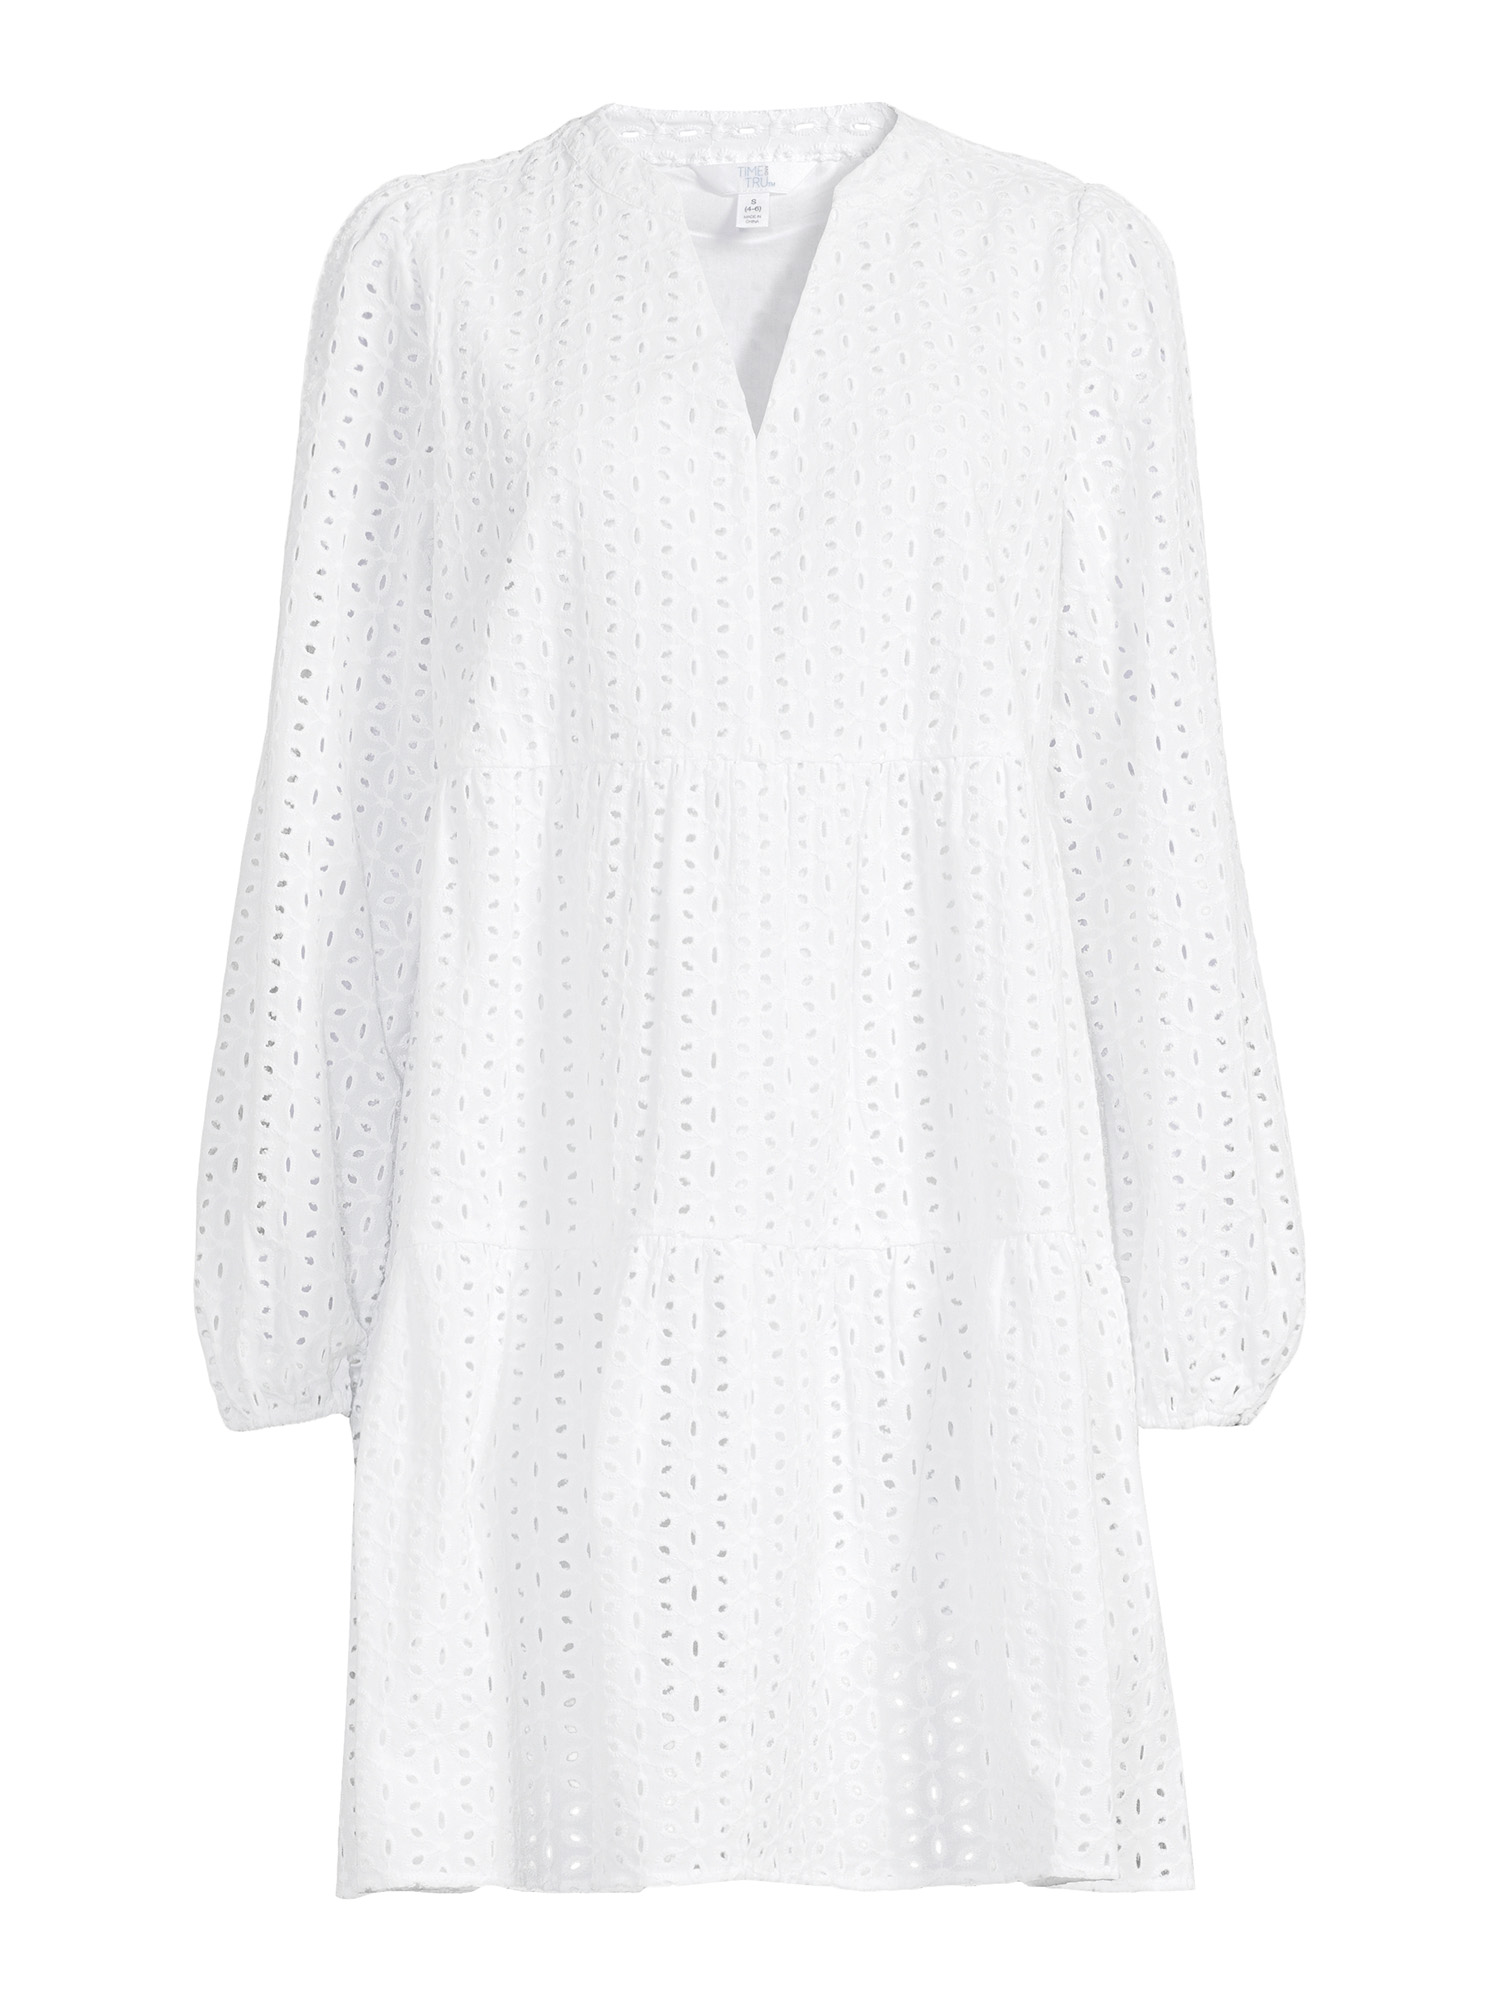 Time and Tru Women's Long Sleeve Solid and Eyelet Dress - image 3 of 5